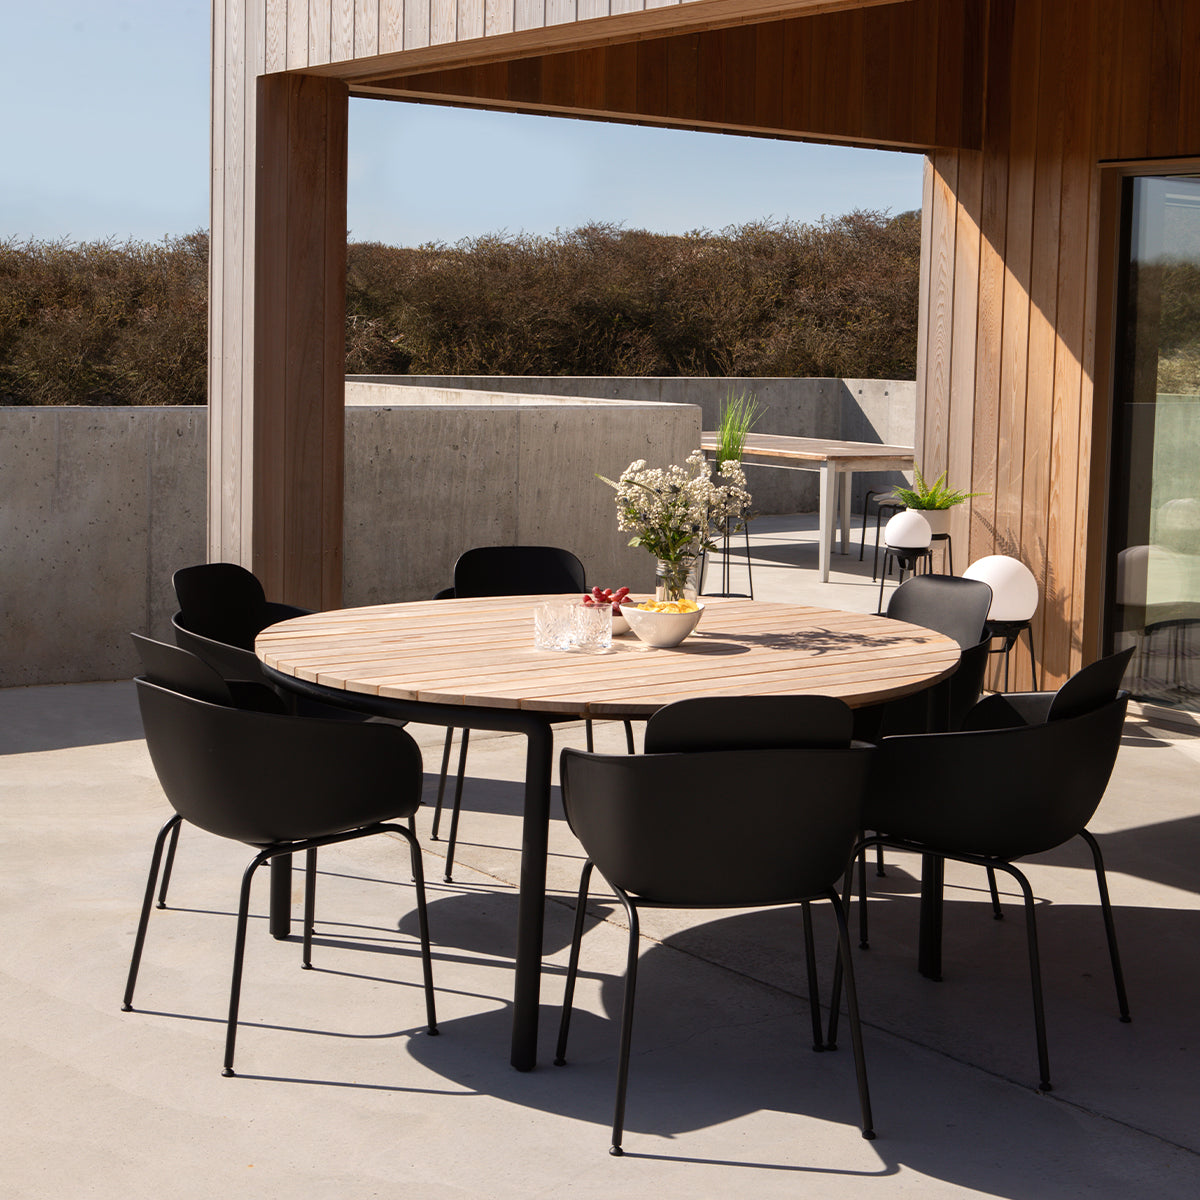 Patio Dining Table - Ø160 [Contract]